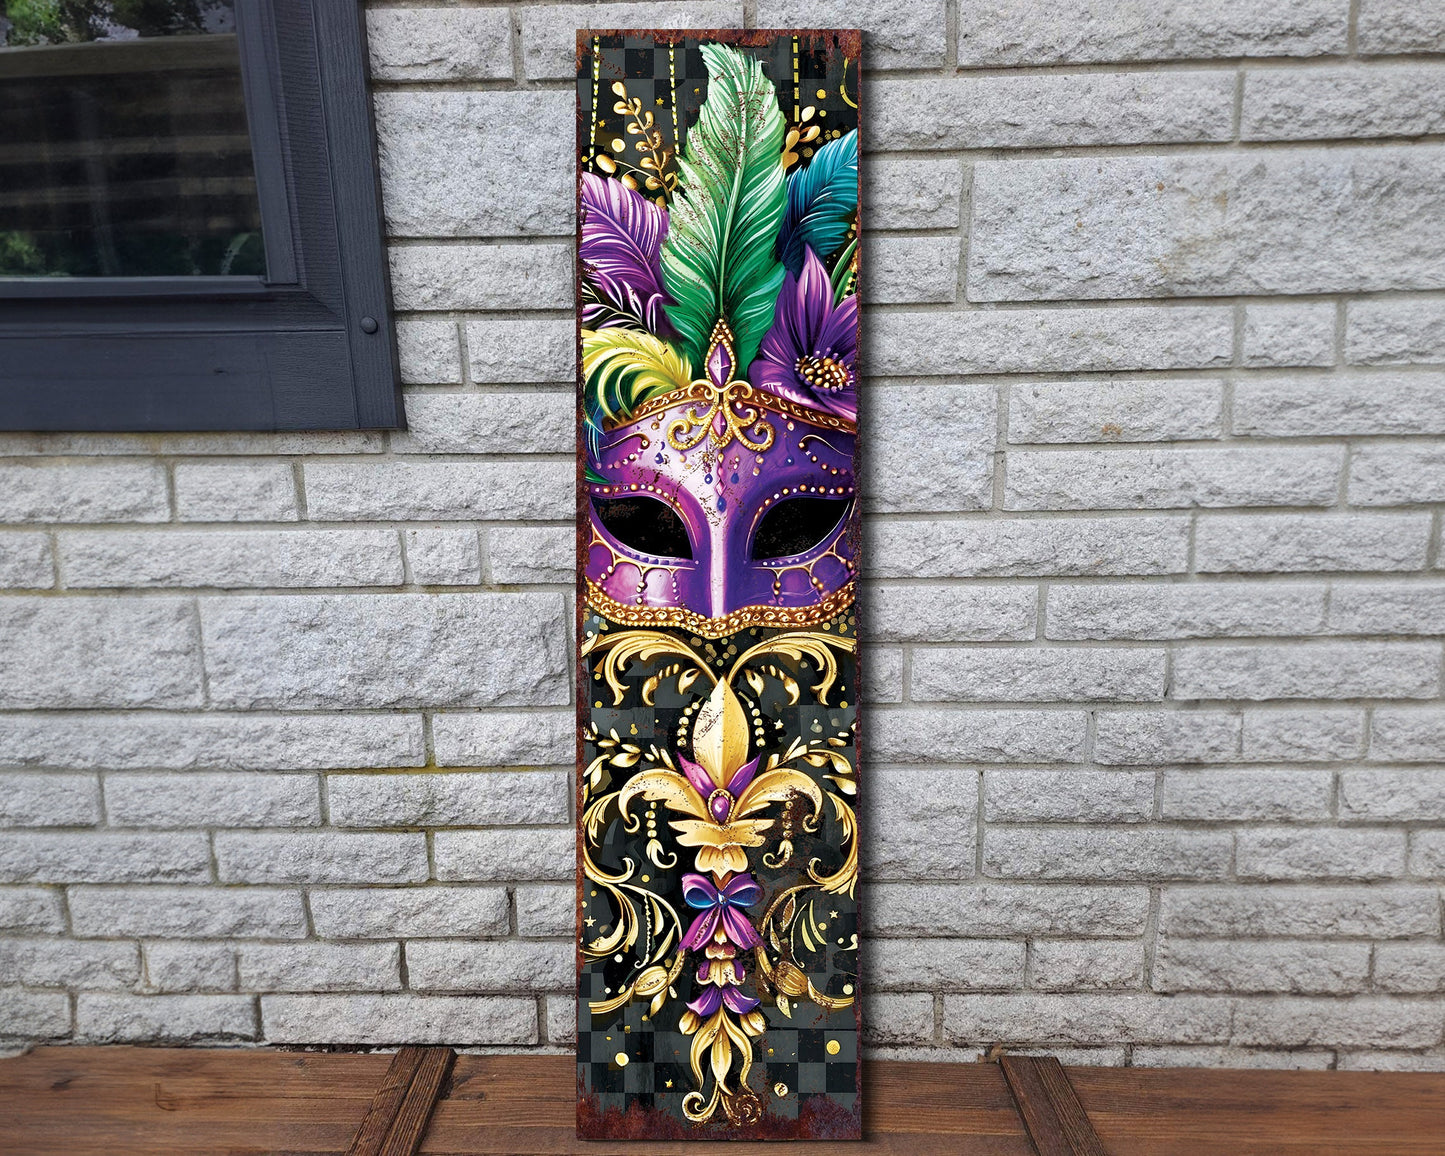 Rustic Modern Farmhouse Entryway Board - 36in Mardi Gras Mask Art Porch Sign, Front Porch Mardi Gras Welcome Sign